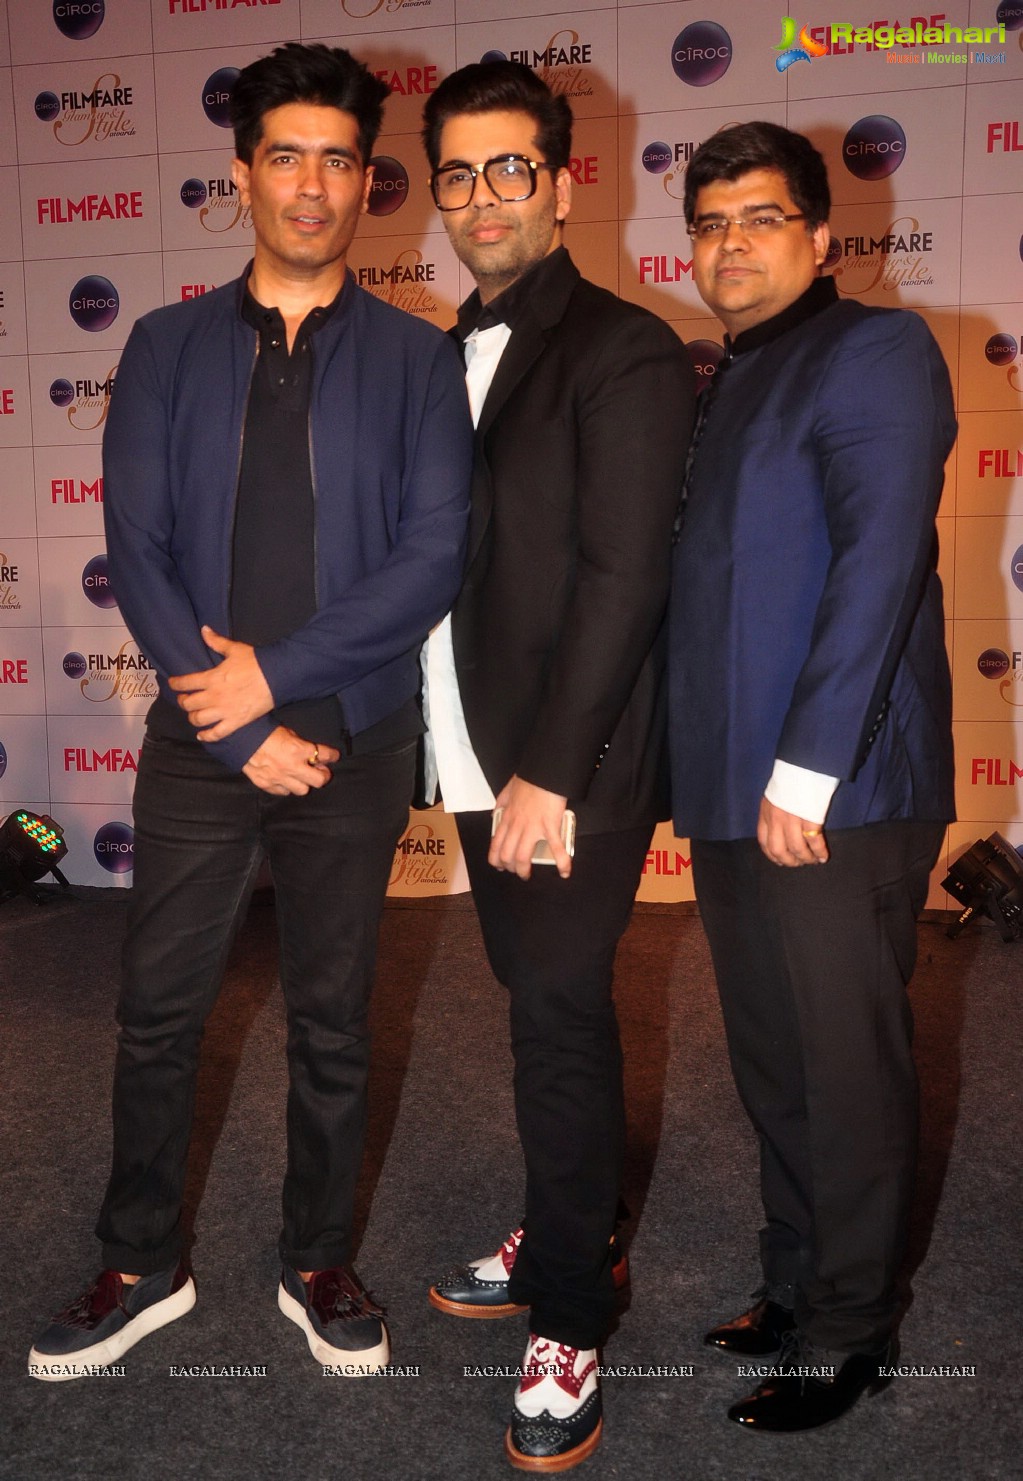 'Ciroc Filmfare Glamour & Style Awards' Issue Launch